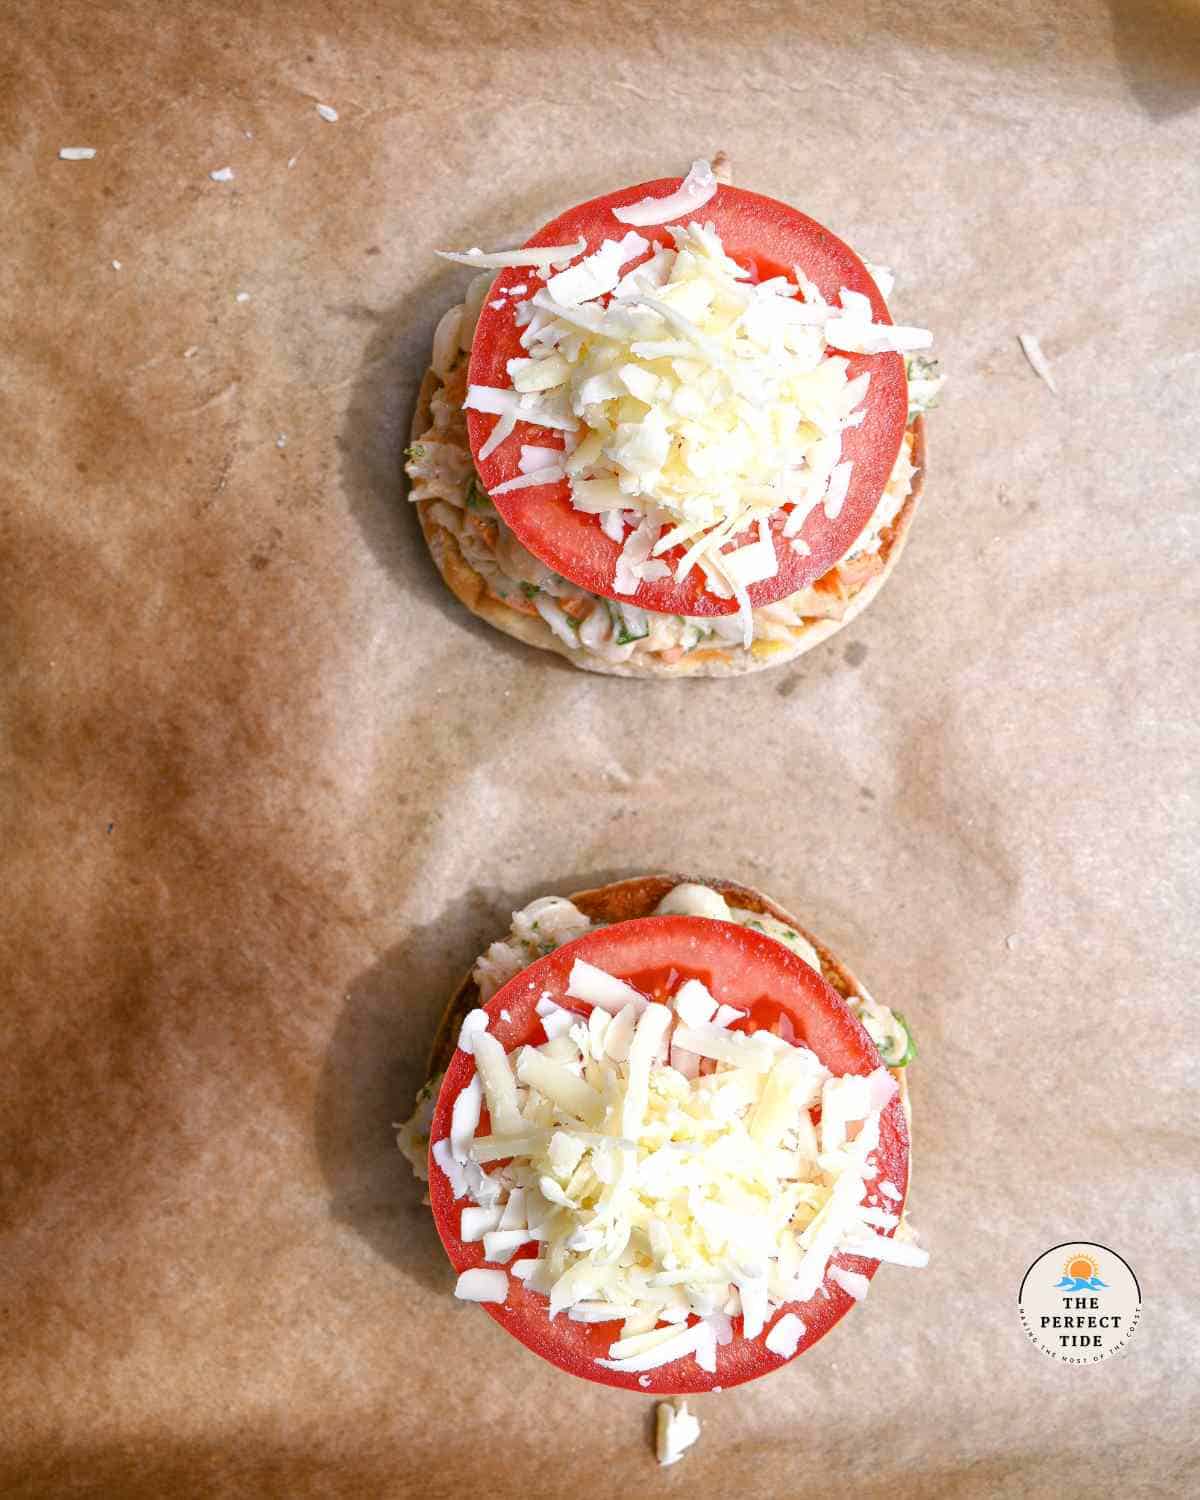 preparing the crab melts by adding crab salad tomato and cheese